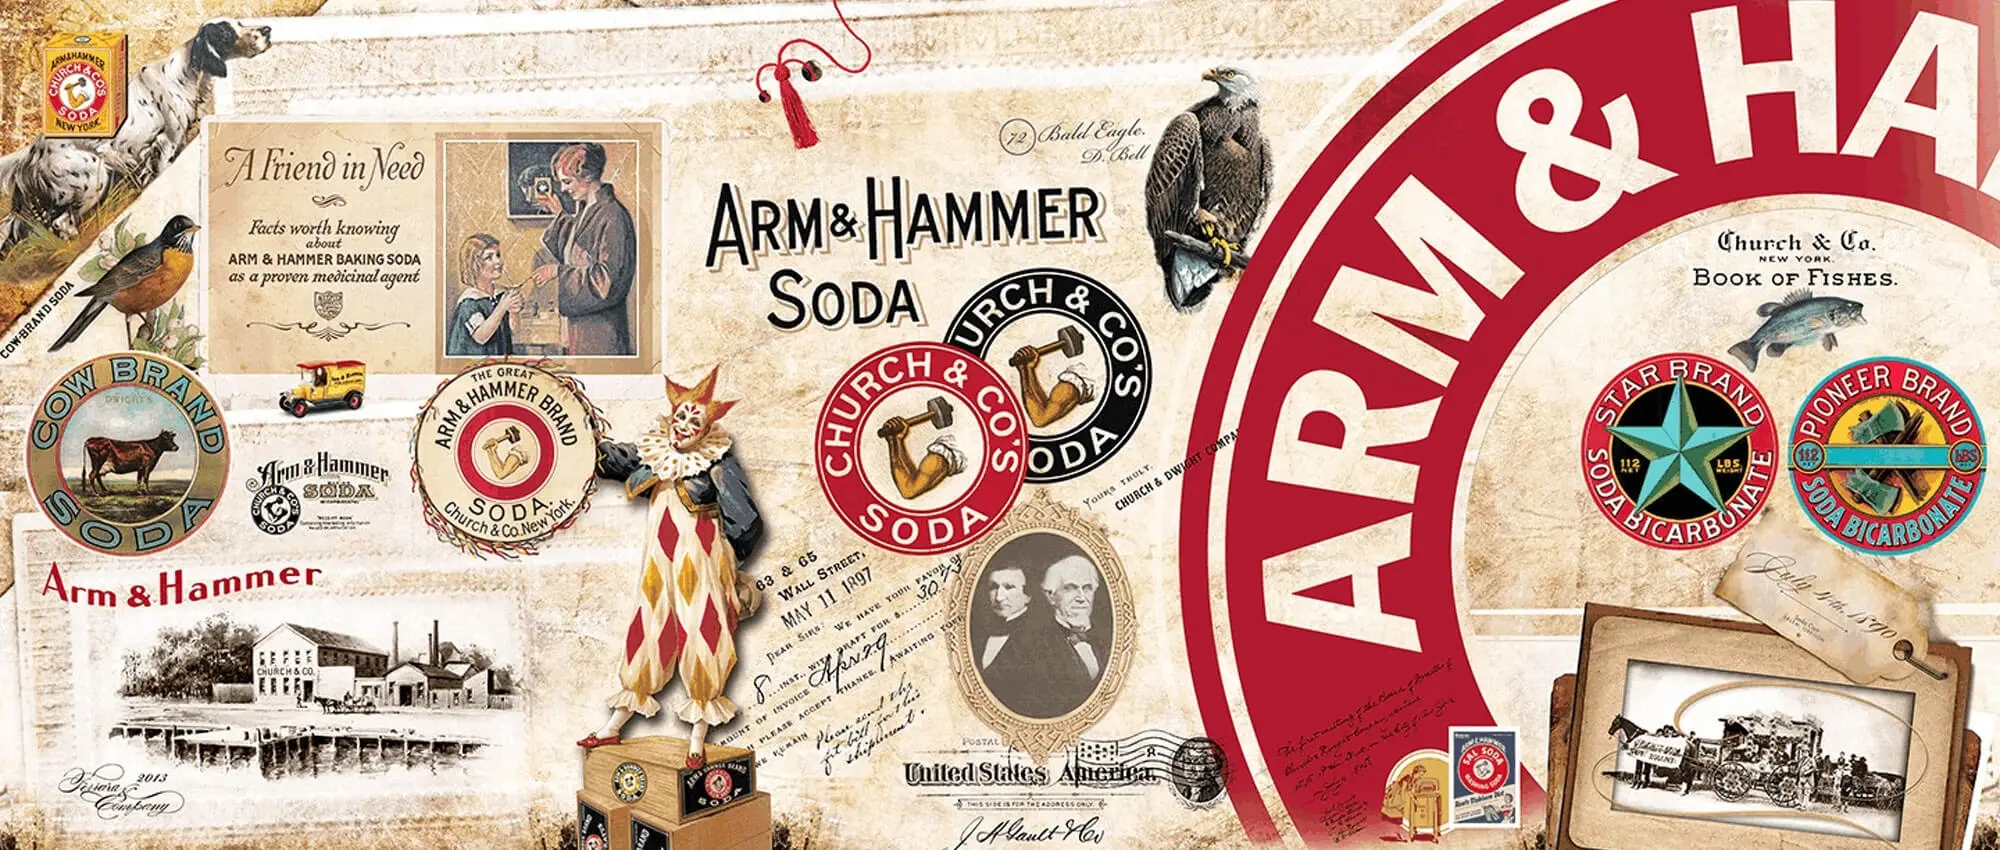 Arm & Hammer<sup>®</sup> Hero by C.M.C. The Food Company GmbH